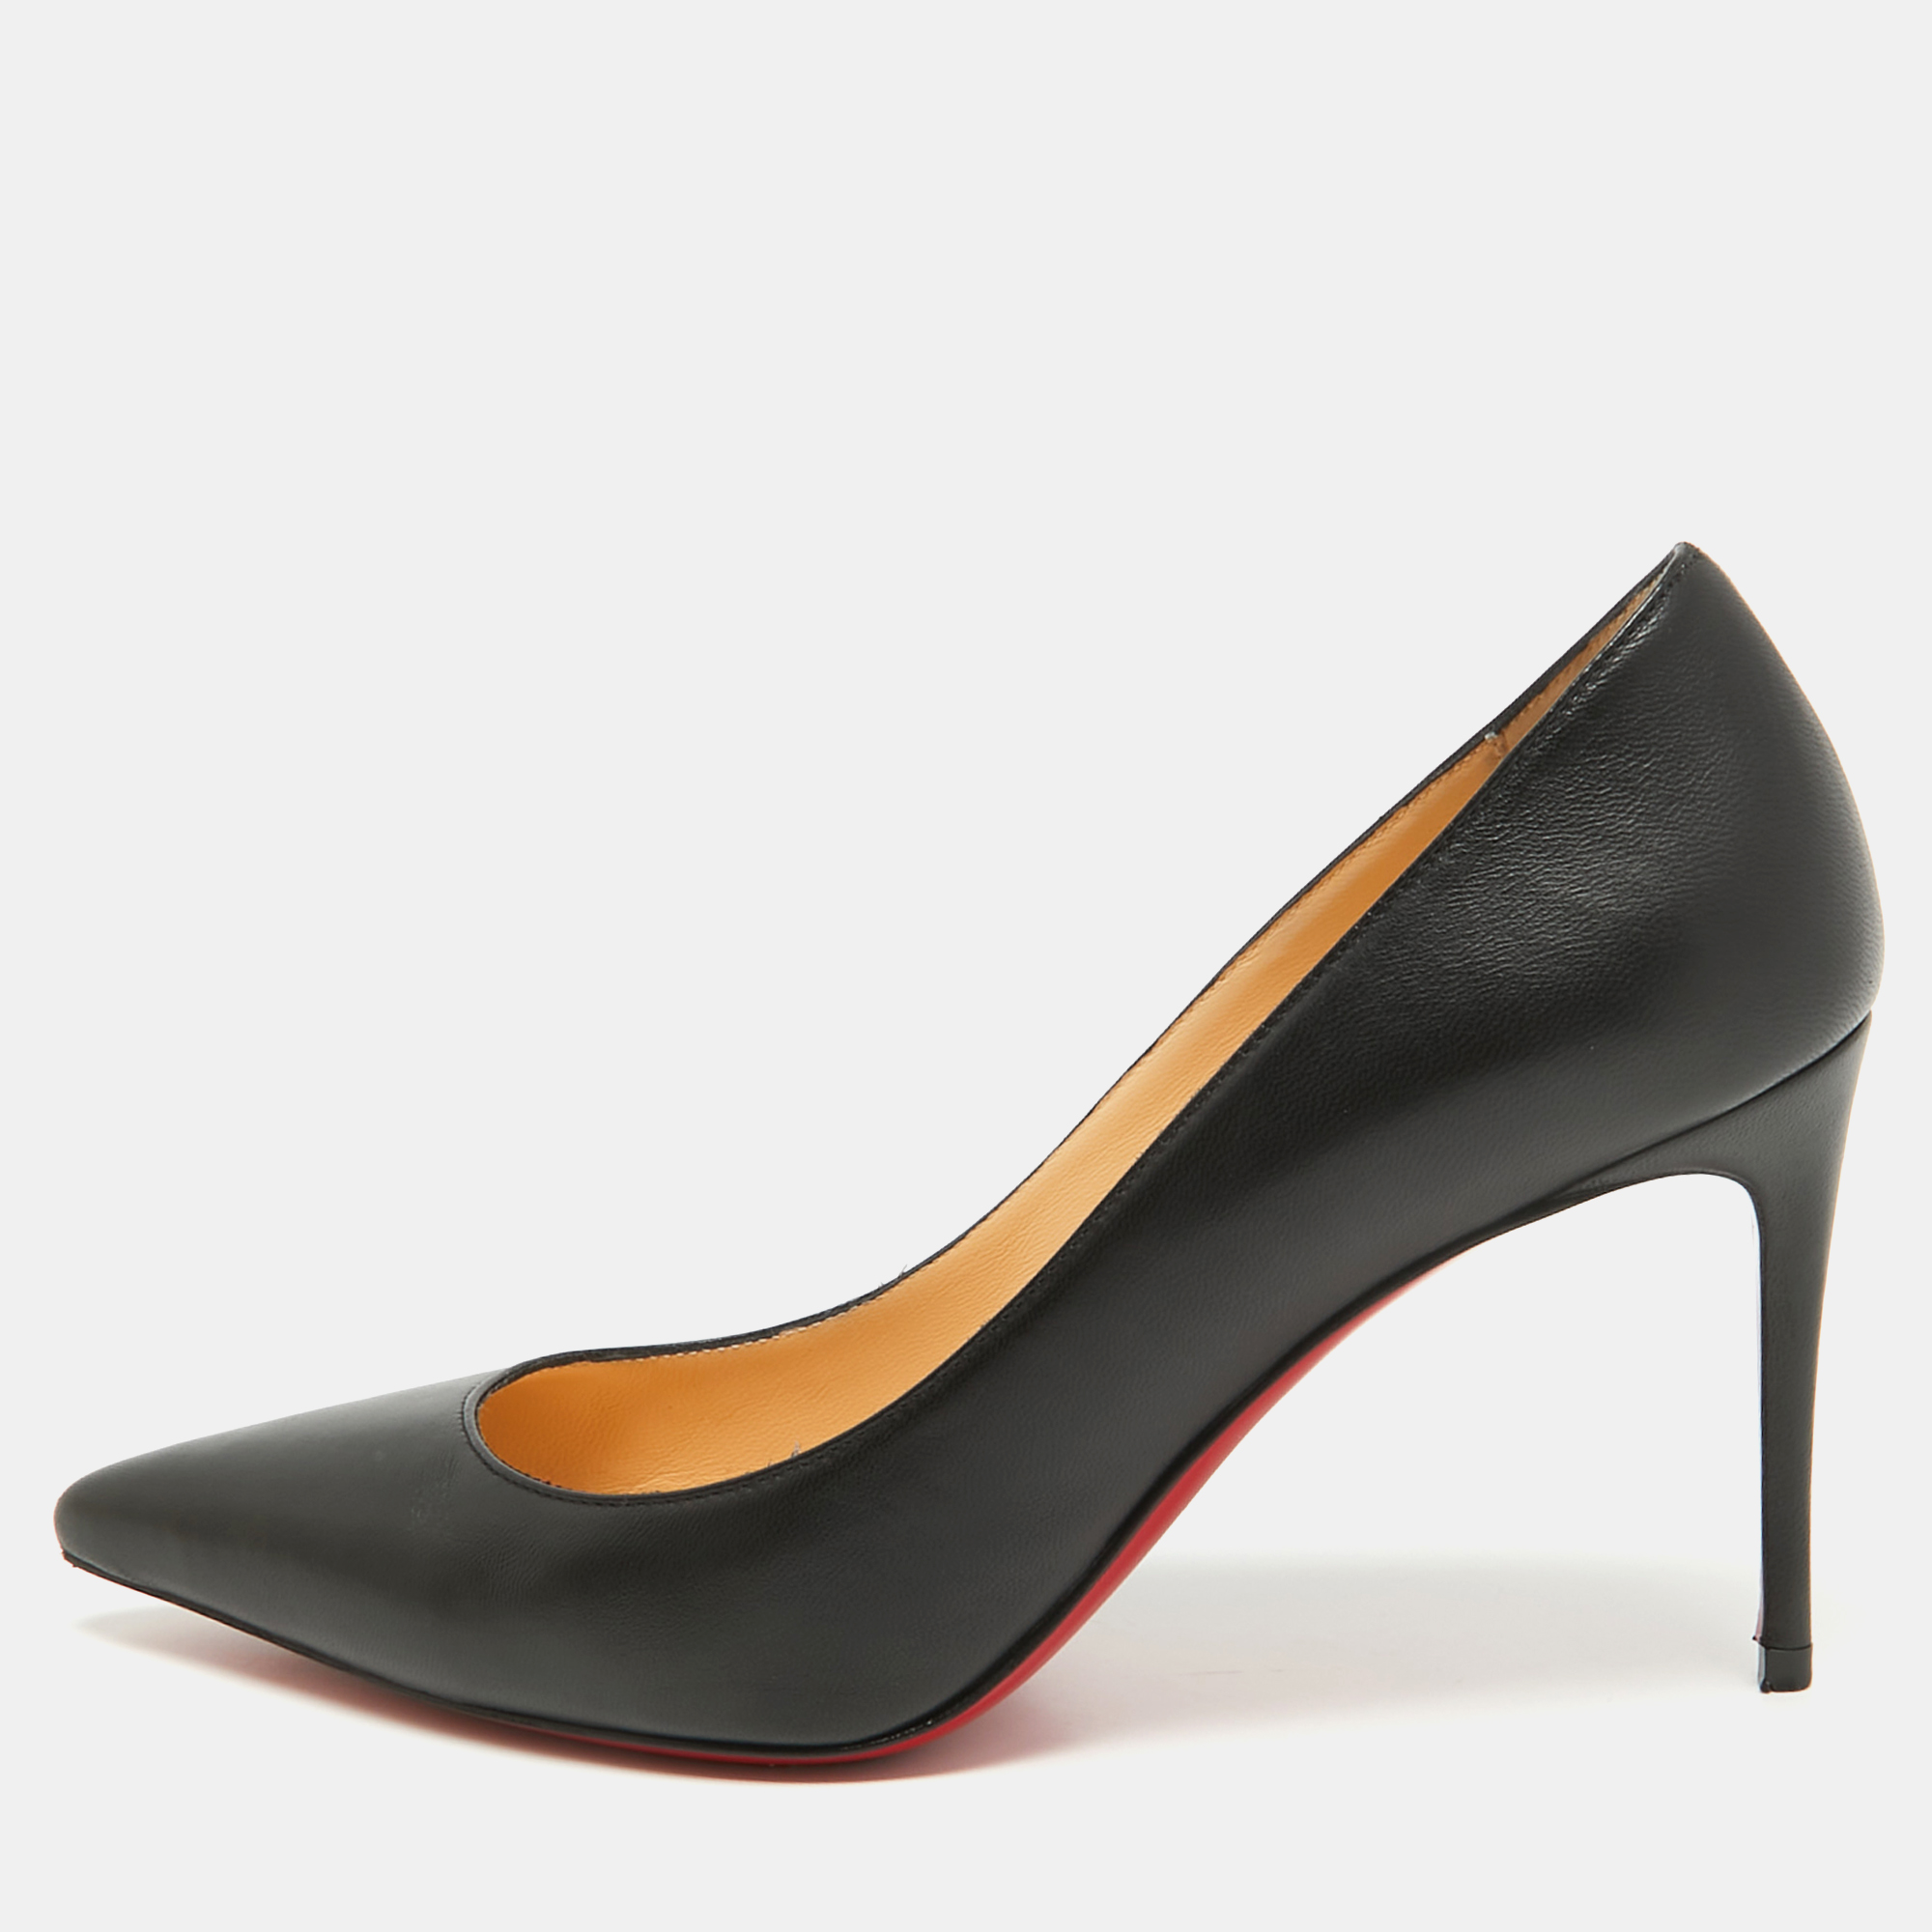 Pre-owned Christian Louboutin Black Leather Kate Pumps Size 38